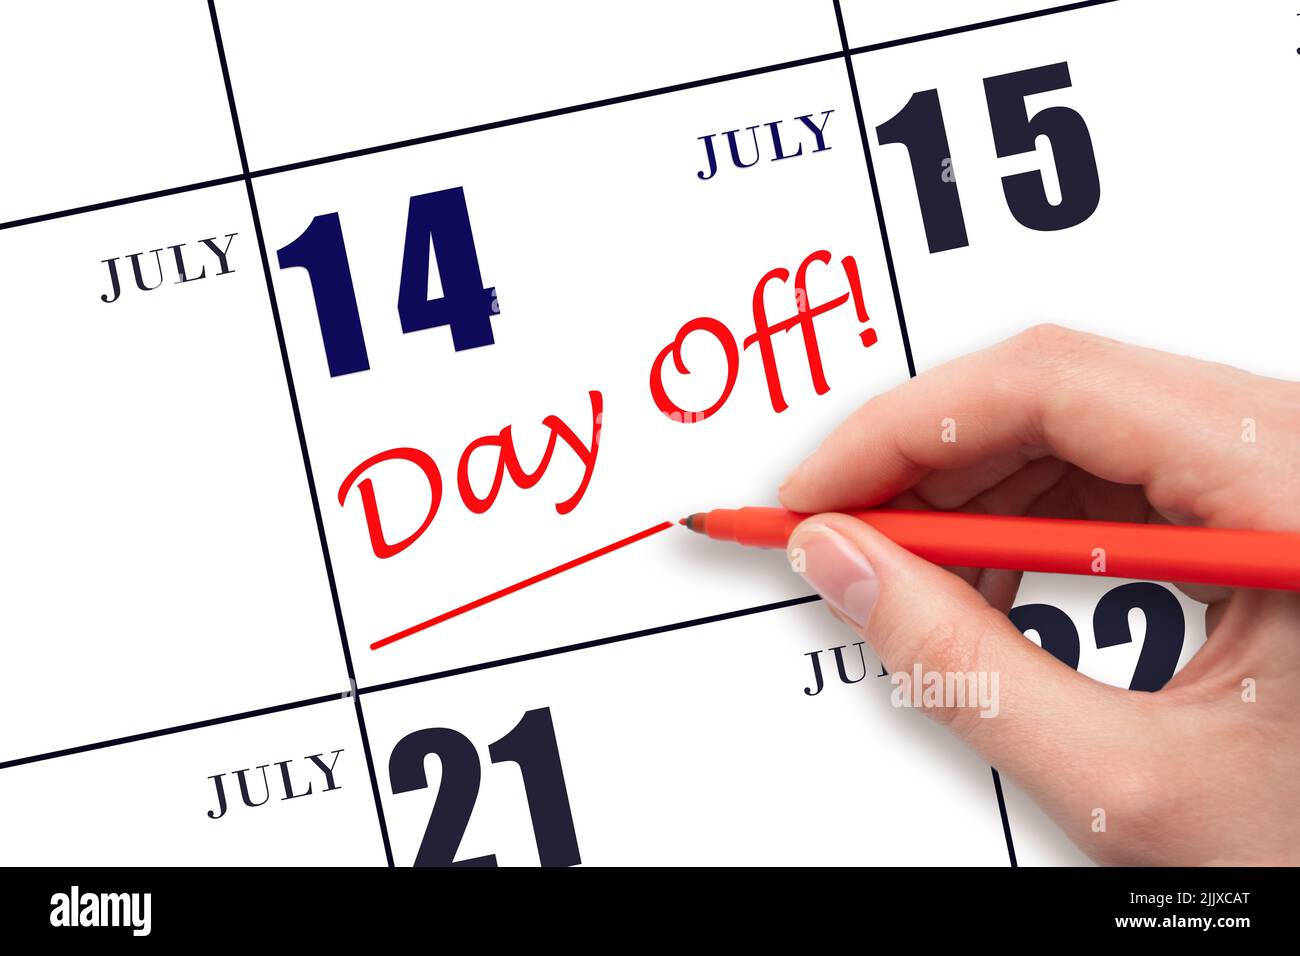 14th day of July. Hand writing text DAY OFF and drawing a line on calendar date 14 July. Vacation planning concept. Summer month, day of the year conc Stock Photo